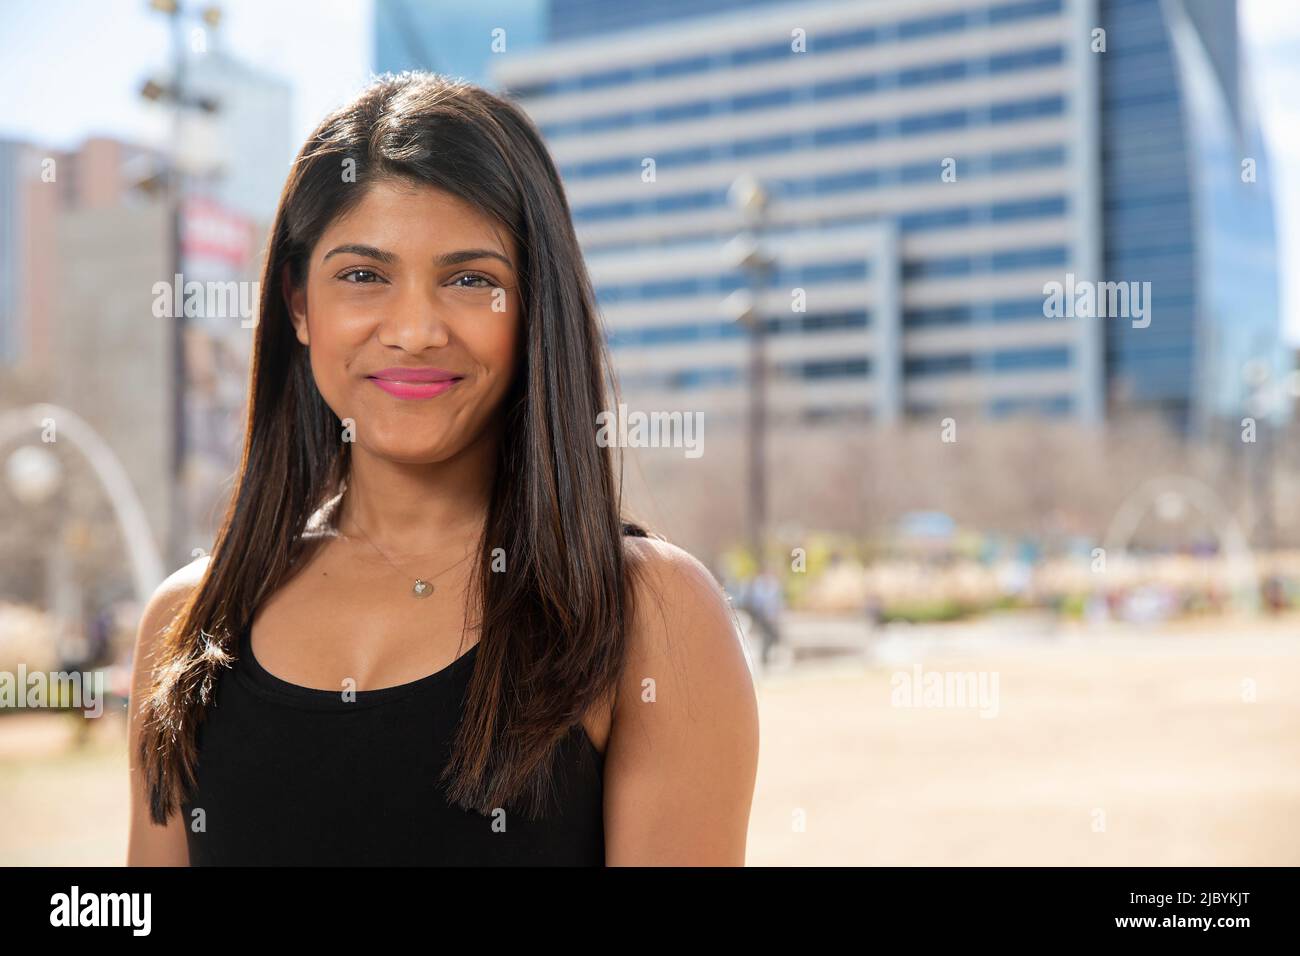 Smiling portrait of young ethnic woman standing in park wearing black tank top Stock Photo